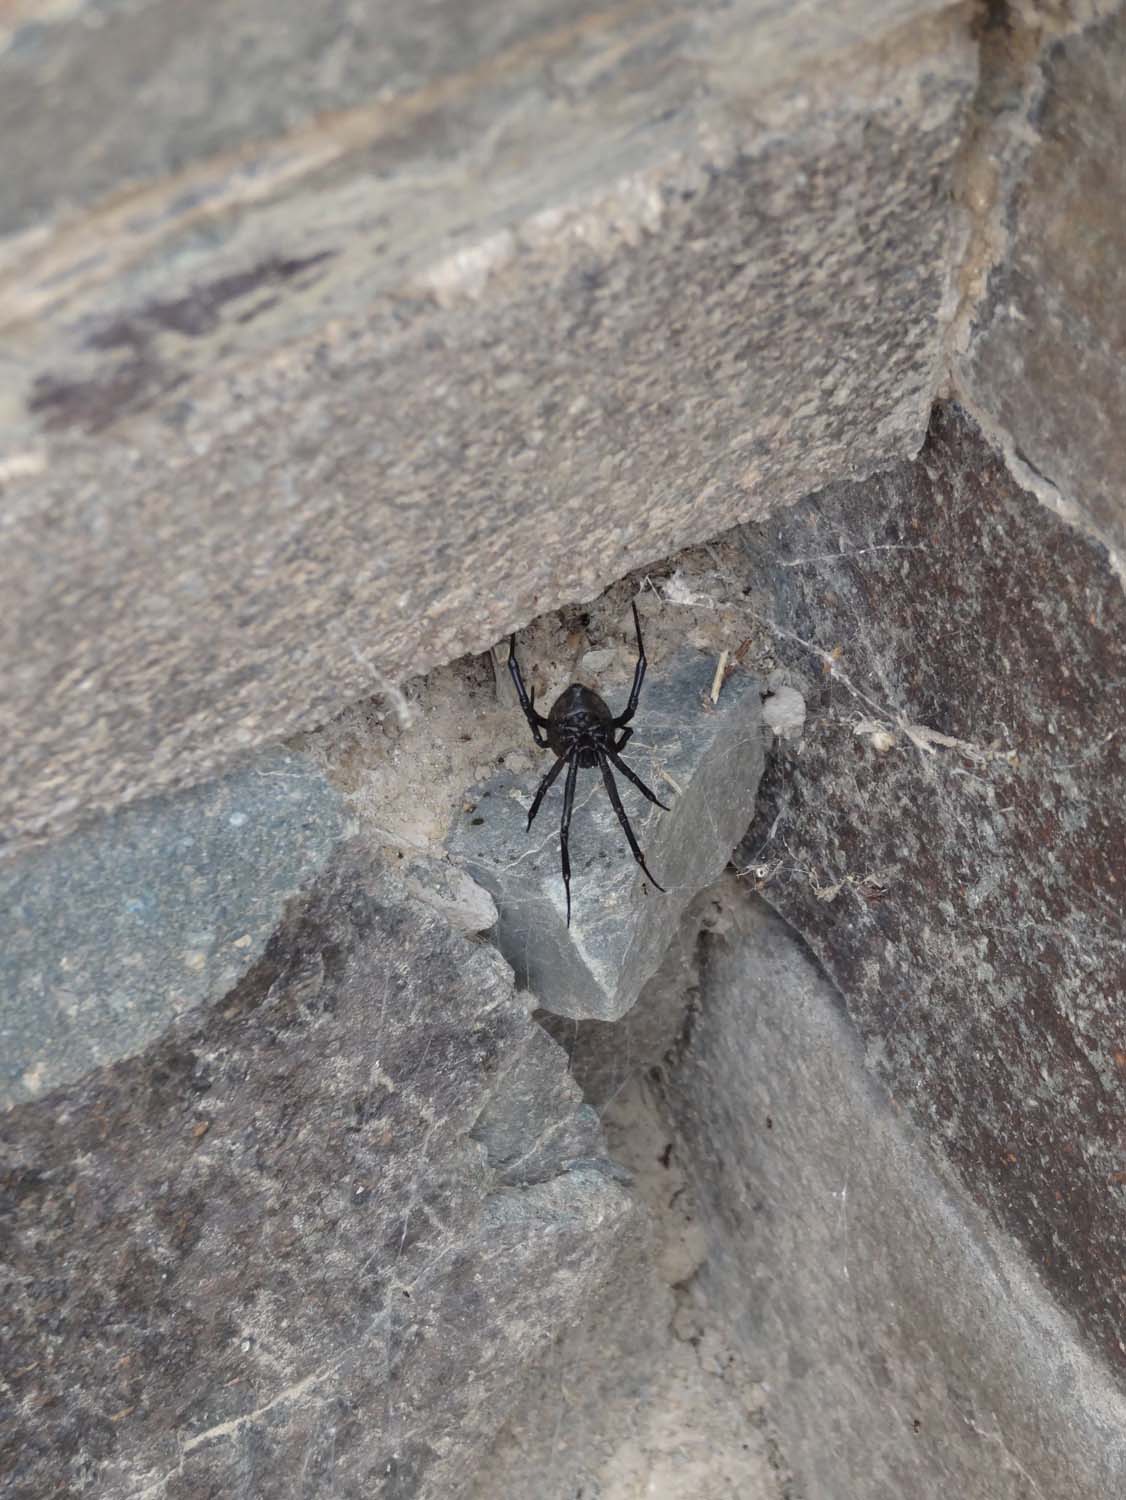 local version of the black widow spider